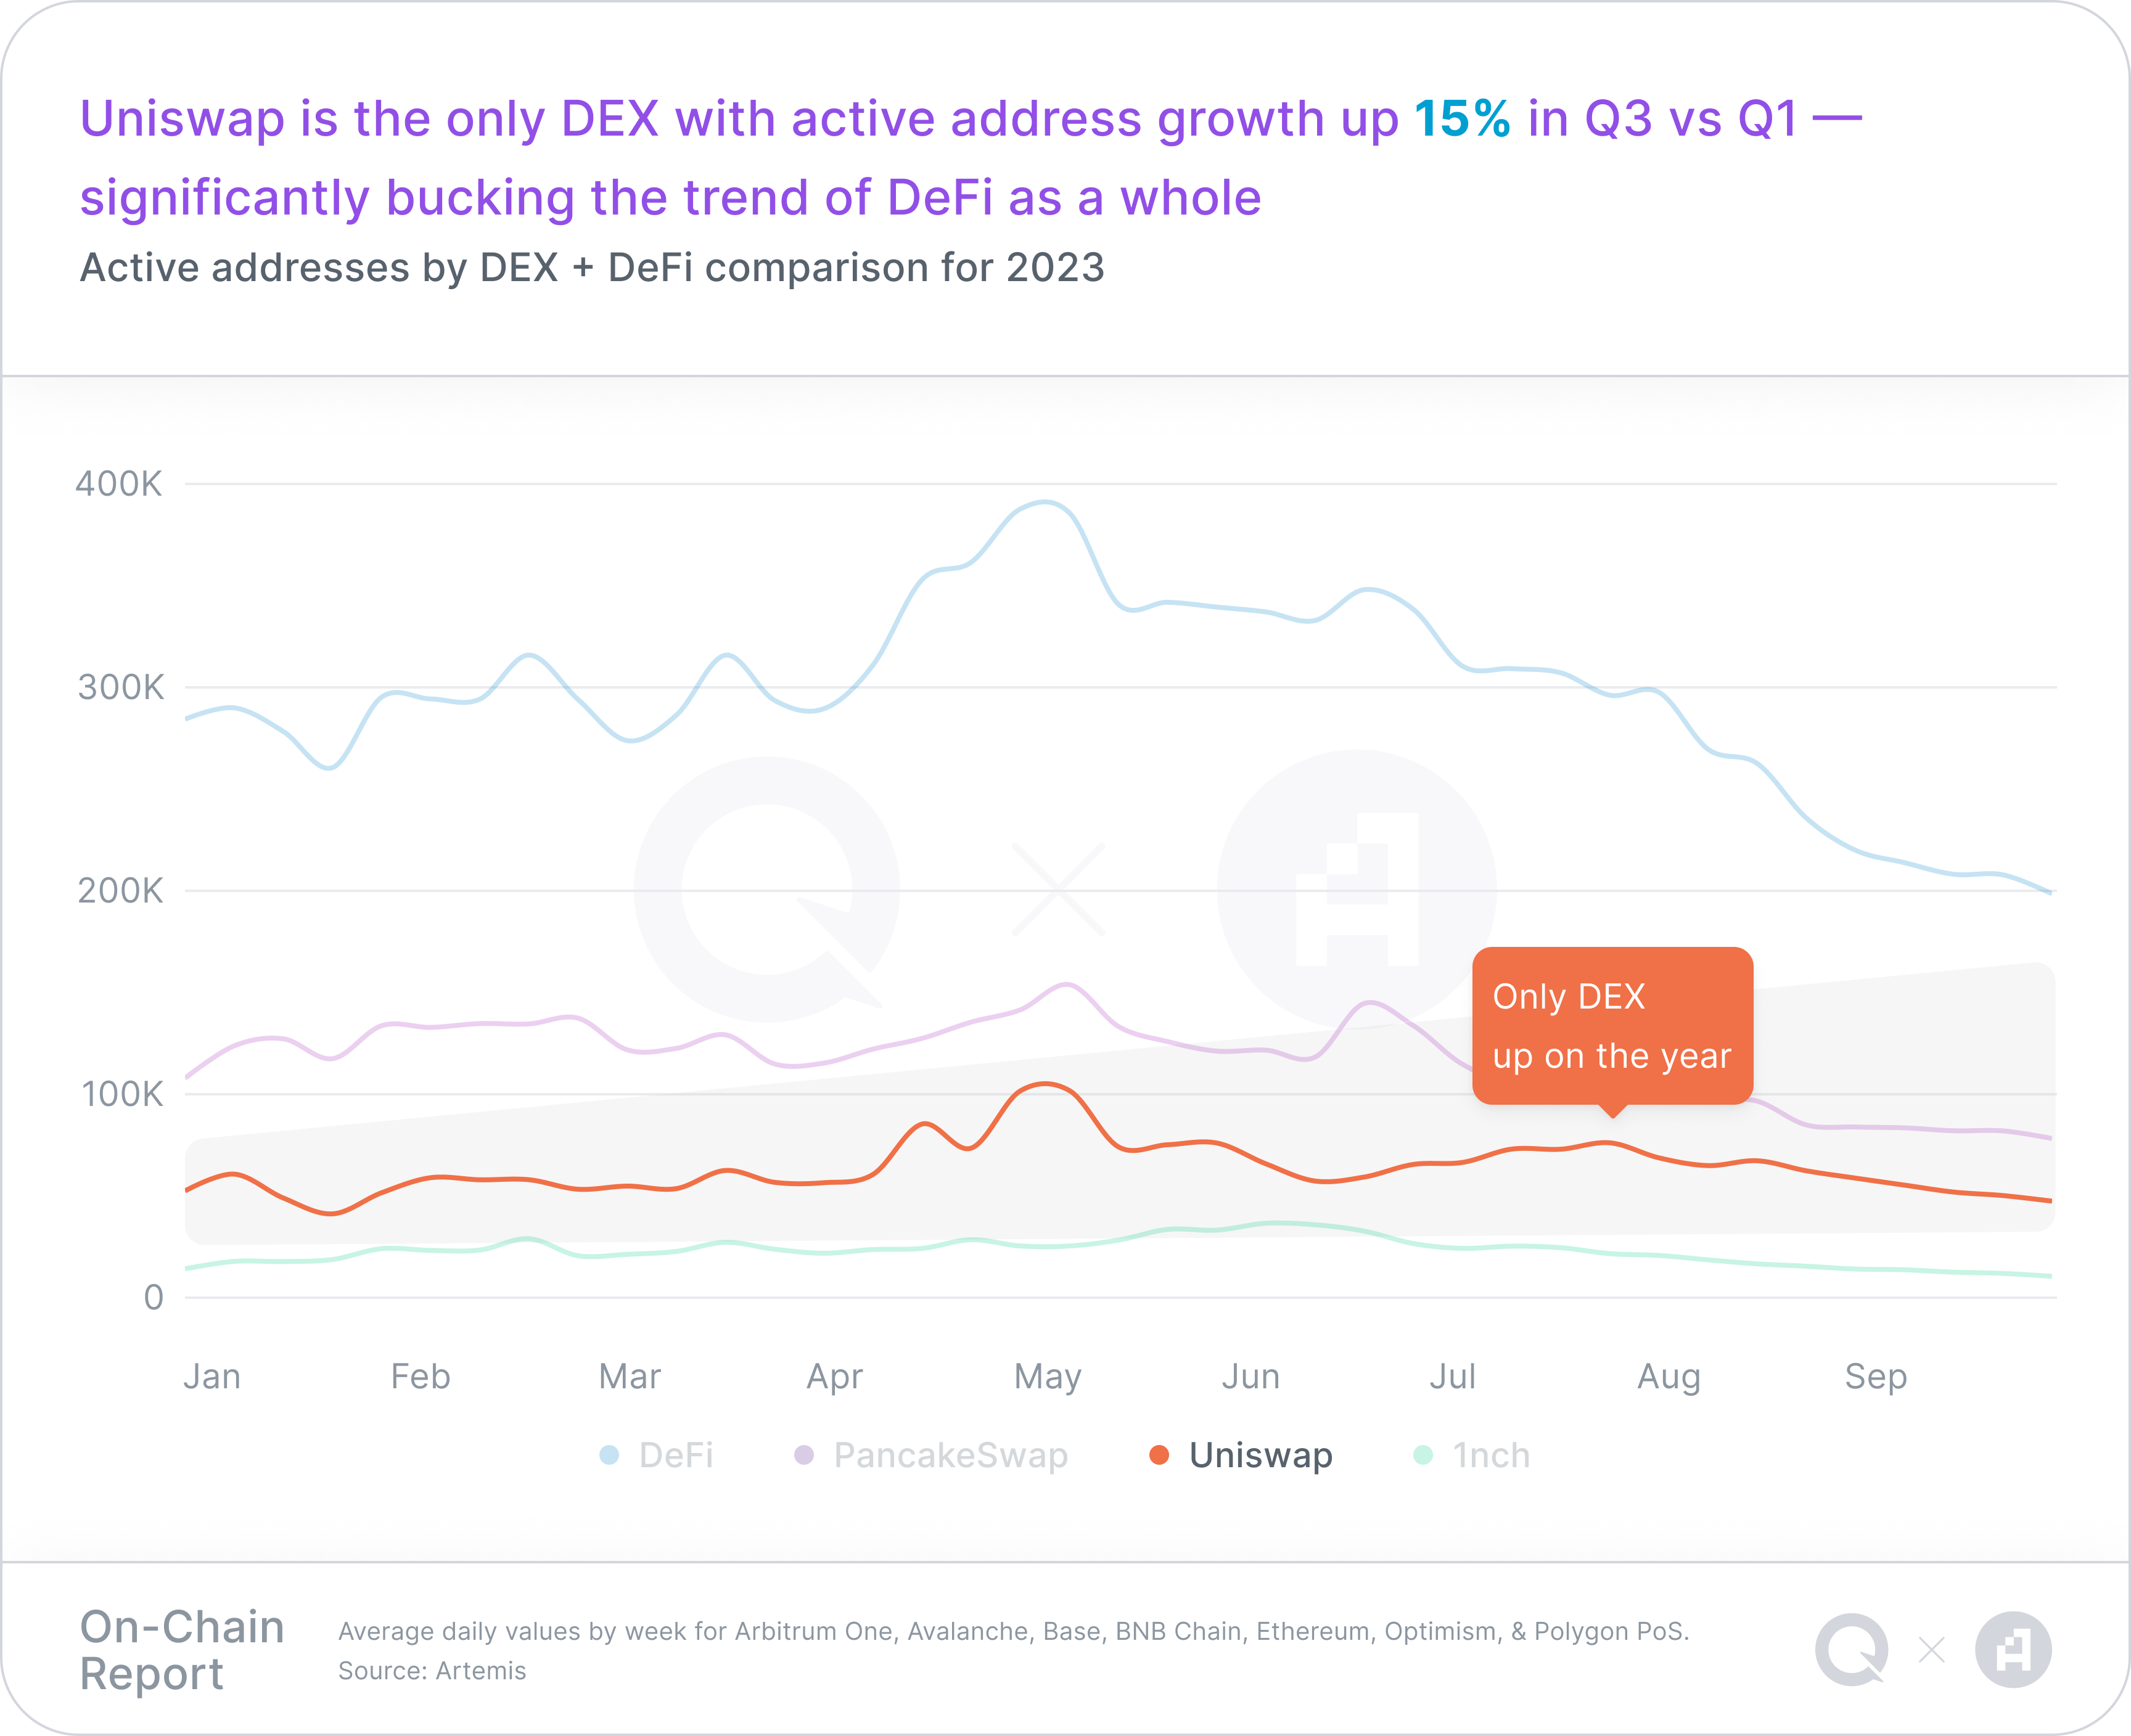 A chart representing active addresses by DEX + DeFi comparison for 2023, with a takeaway headline of "Uniswap is the only DEX with active address growth up 15% in Q3 vs Q1 — significantly bucking the trend of DeFi as a whole"